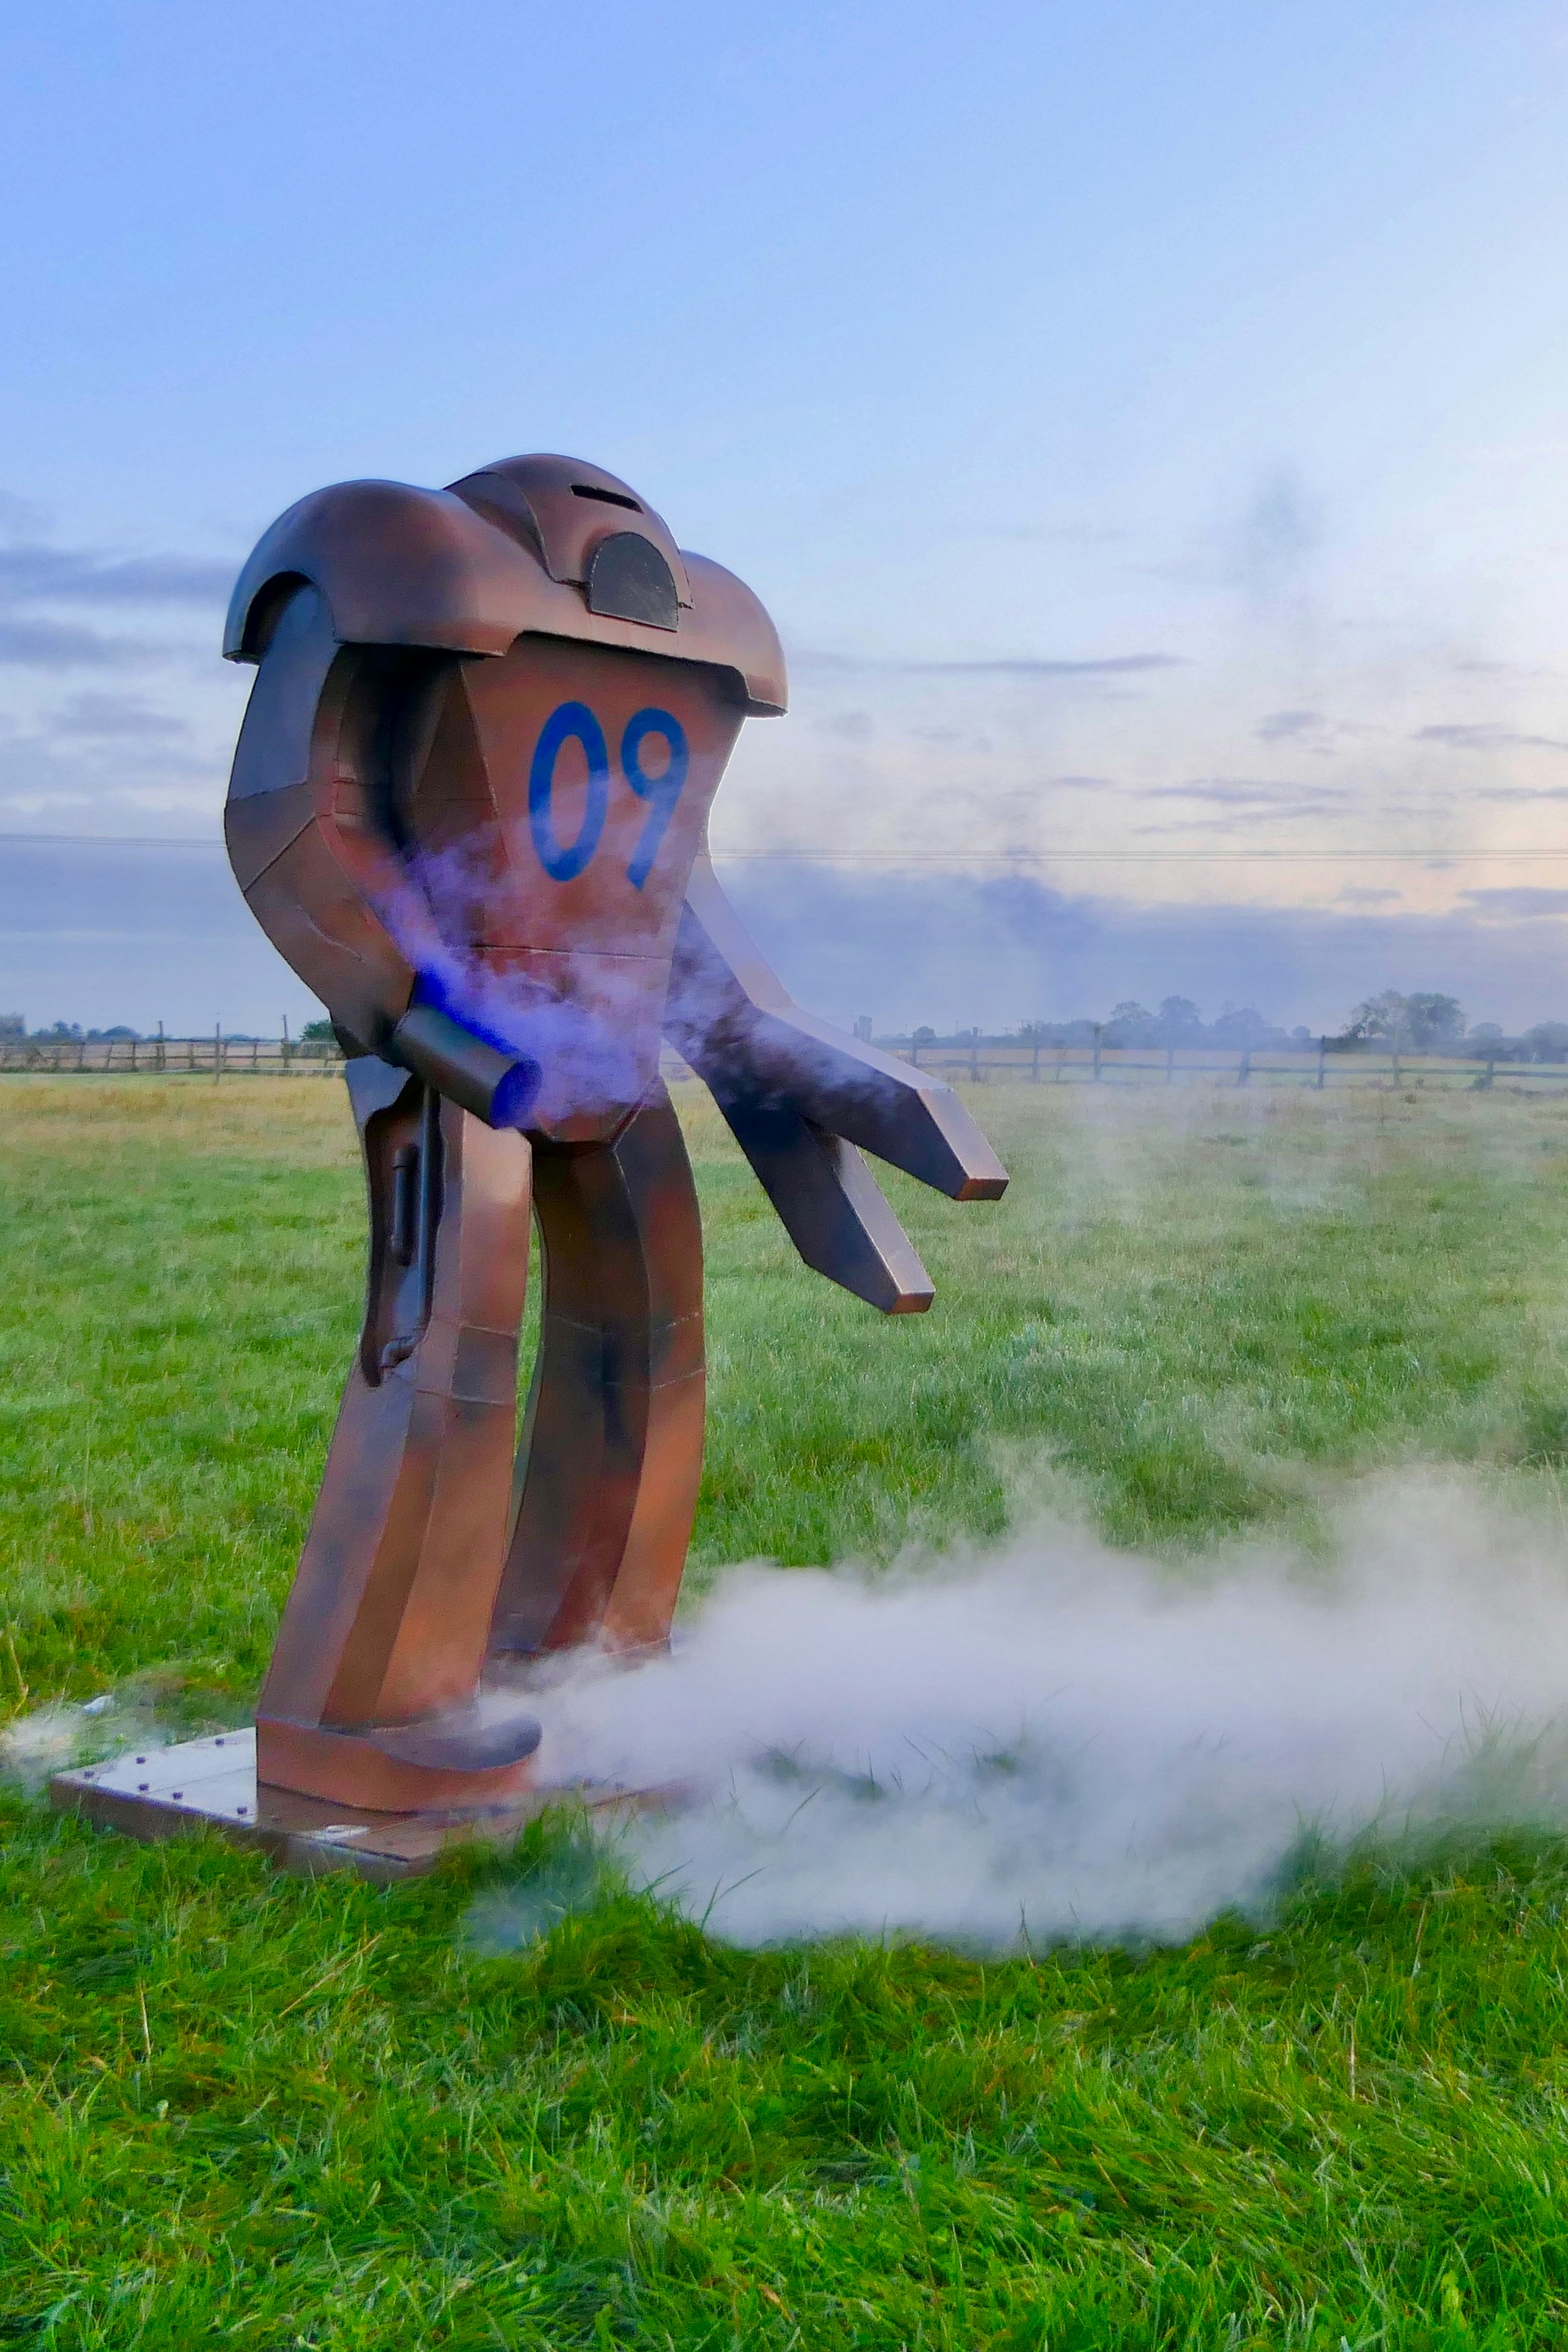 image taken of robot with CO2 and smoke, before using the flame thrower.